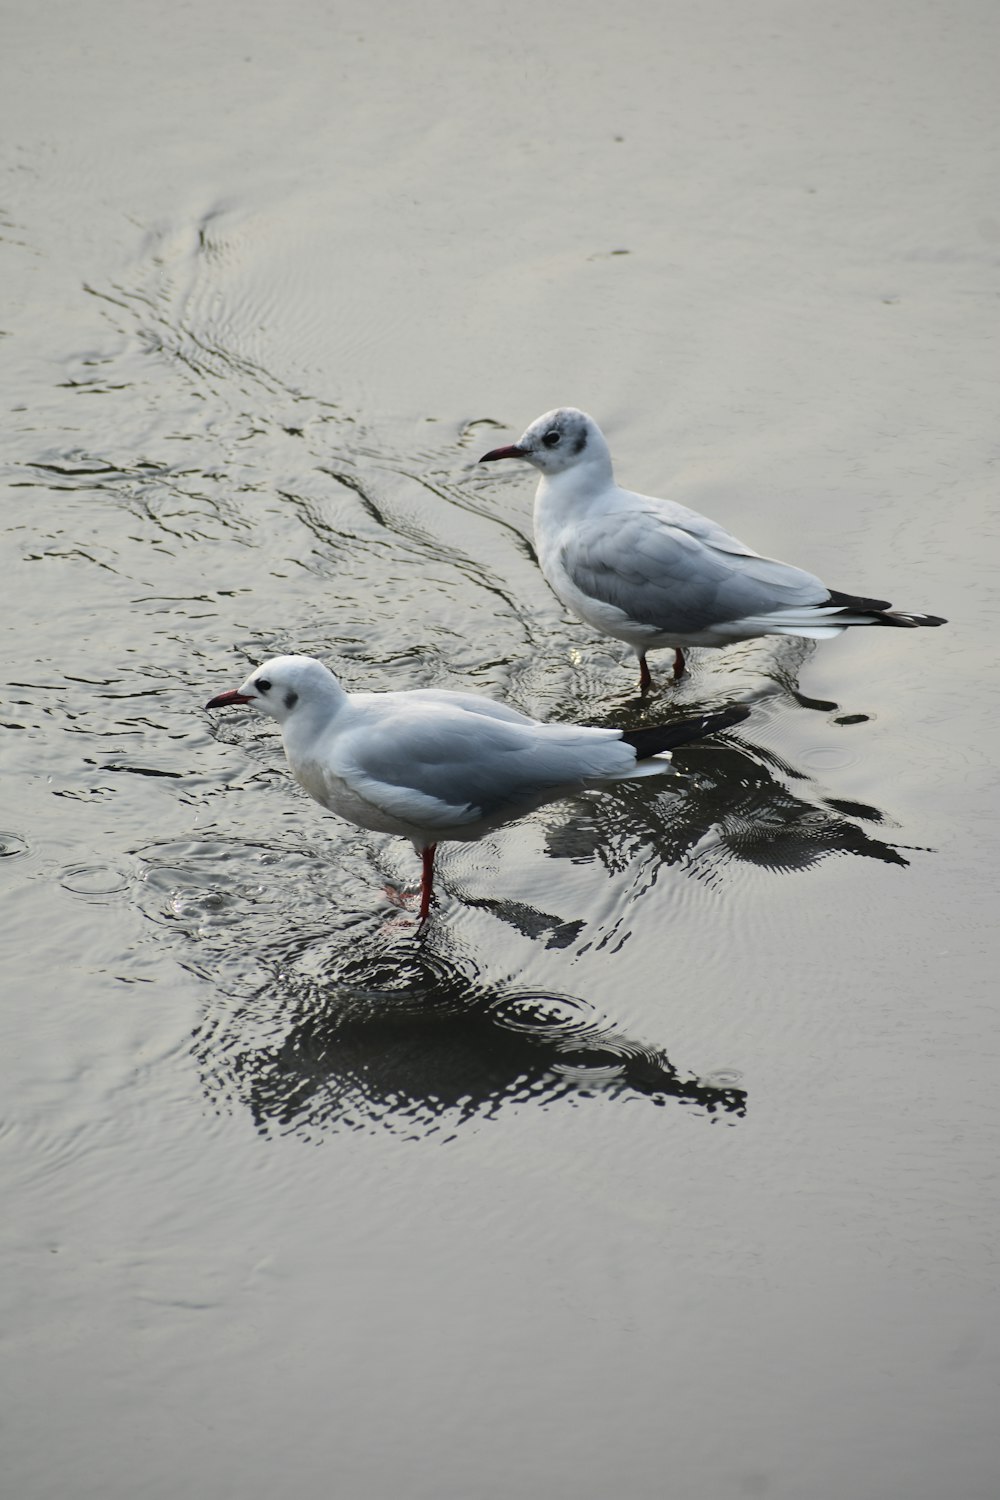 two seagulls standing in shallow water on a beach